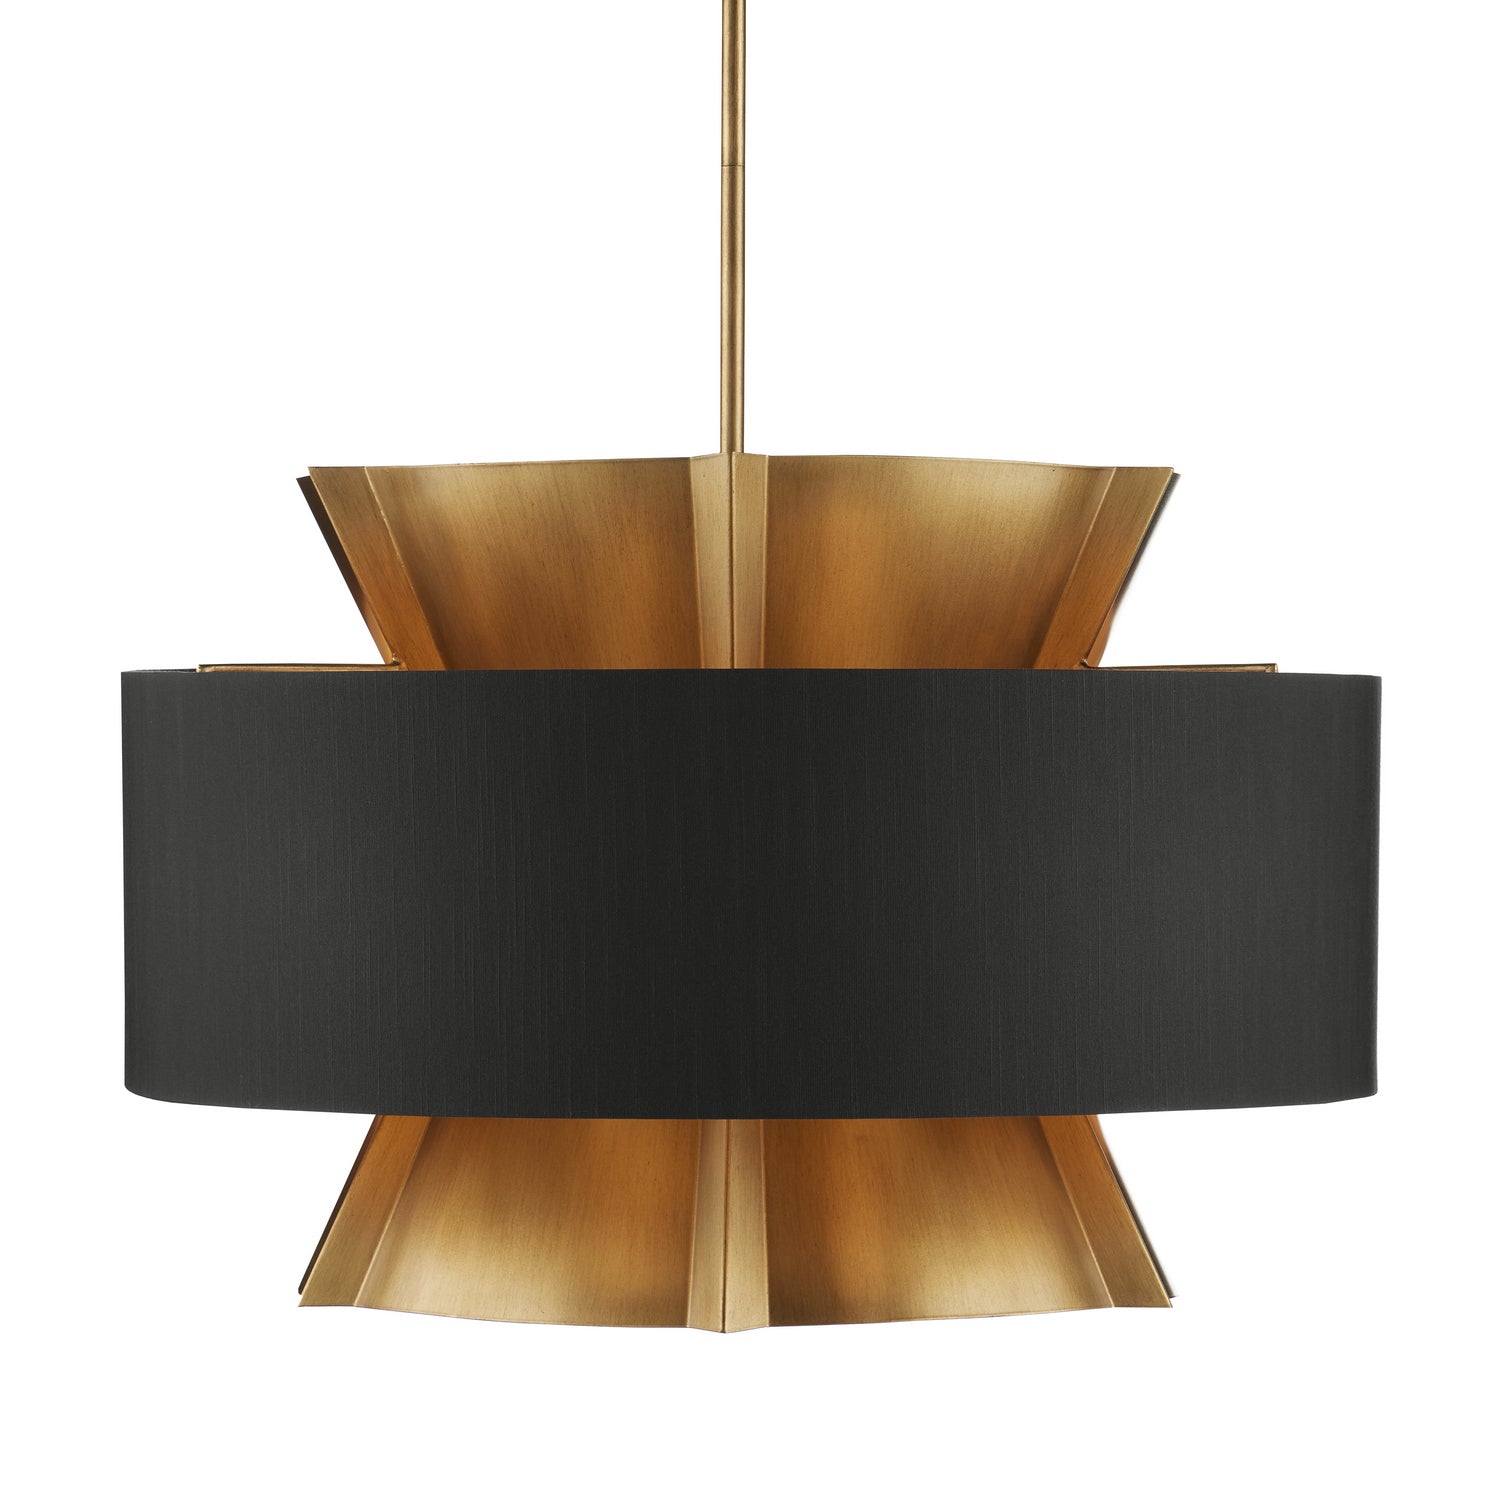 Six Light Chandelier from the Oxenwood collection in Brass/Black finish